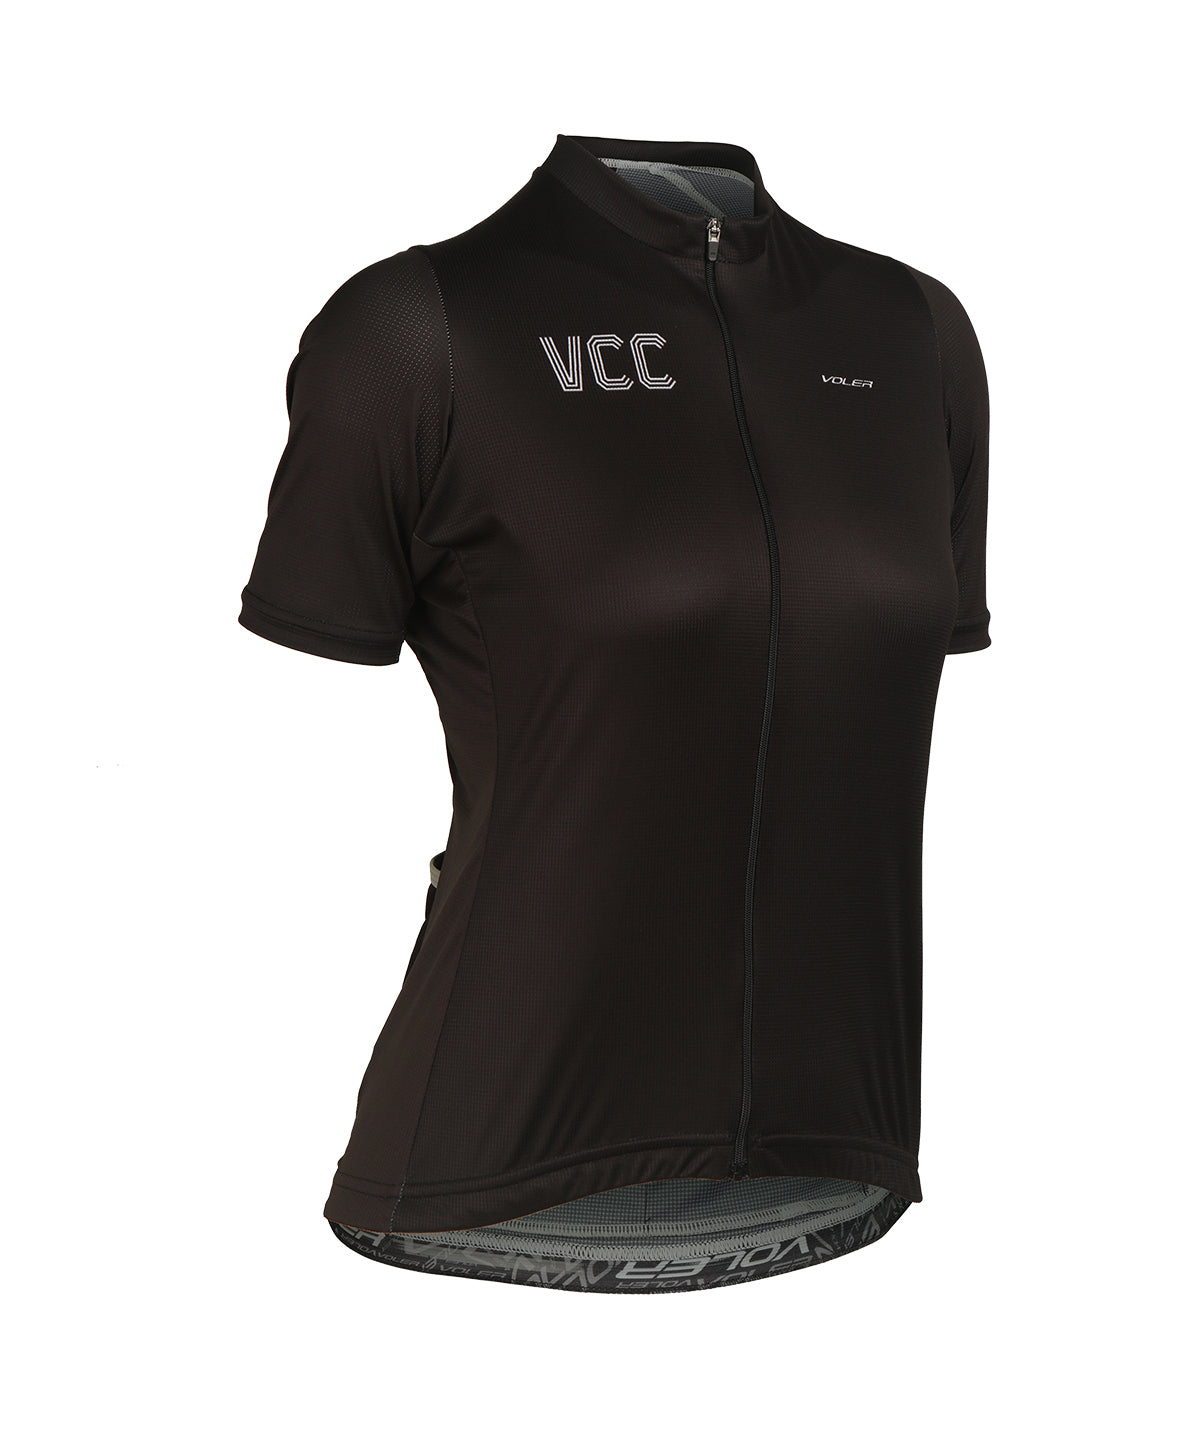 W. PRO CLUB JERSEY - VCC MEMBERS ONLY